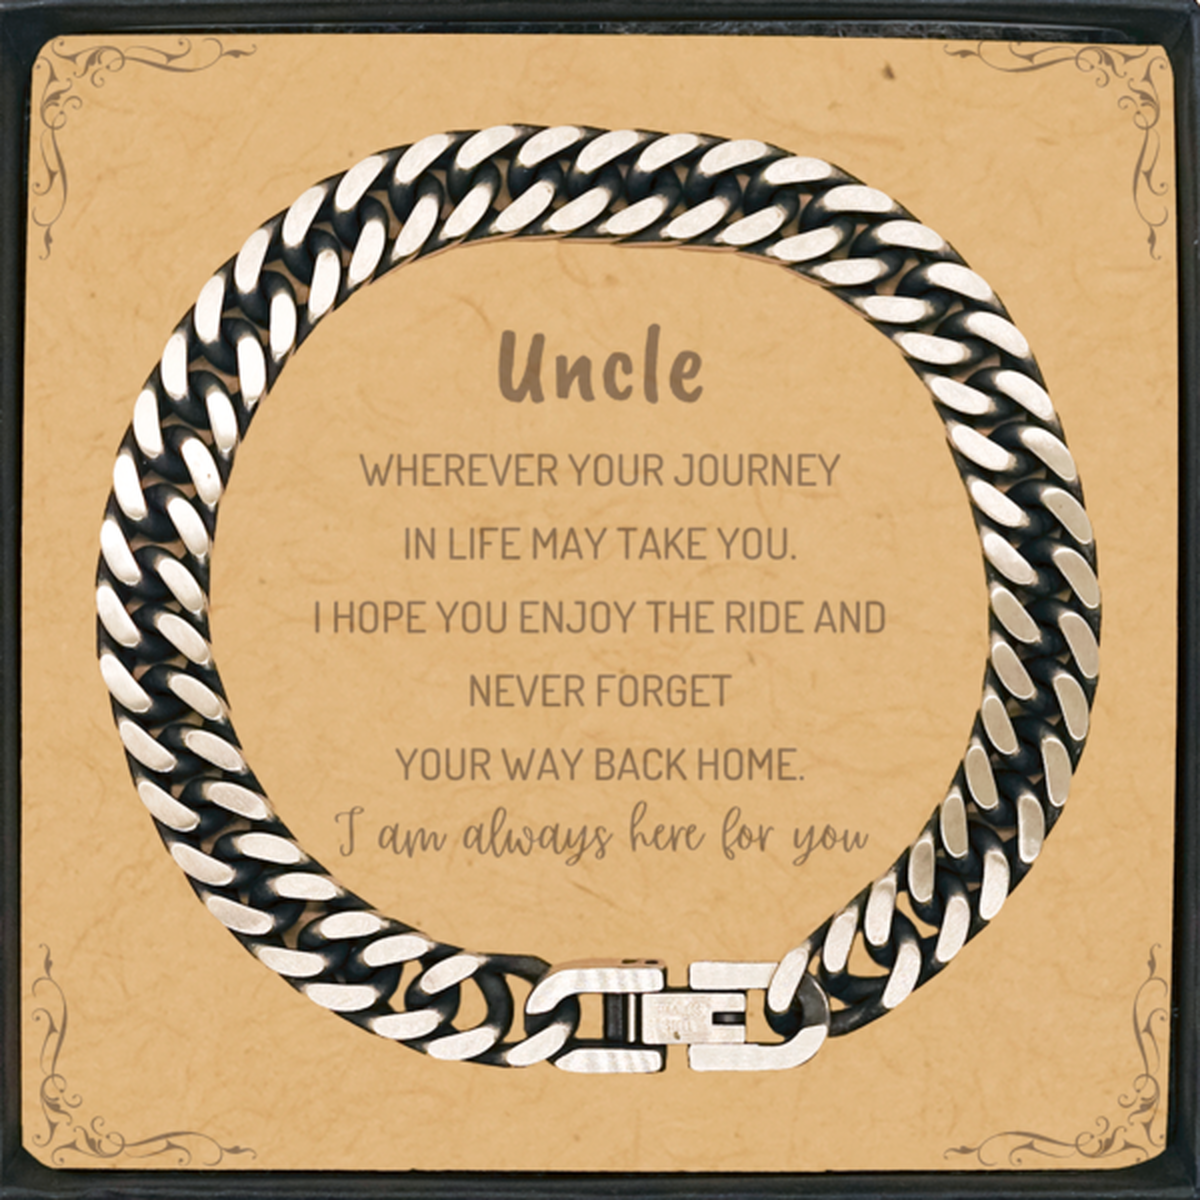 Uncle wherever your journey in life may take you, I am always here for you Uncle Cuban Link Chain Bracelet, Awesome Christmas Gifts For Uncle Message Card, Uncle Birthday Gifts for Men Women Family Loved One